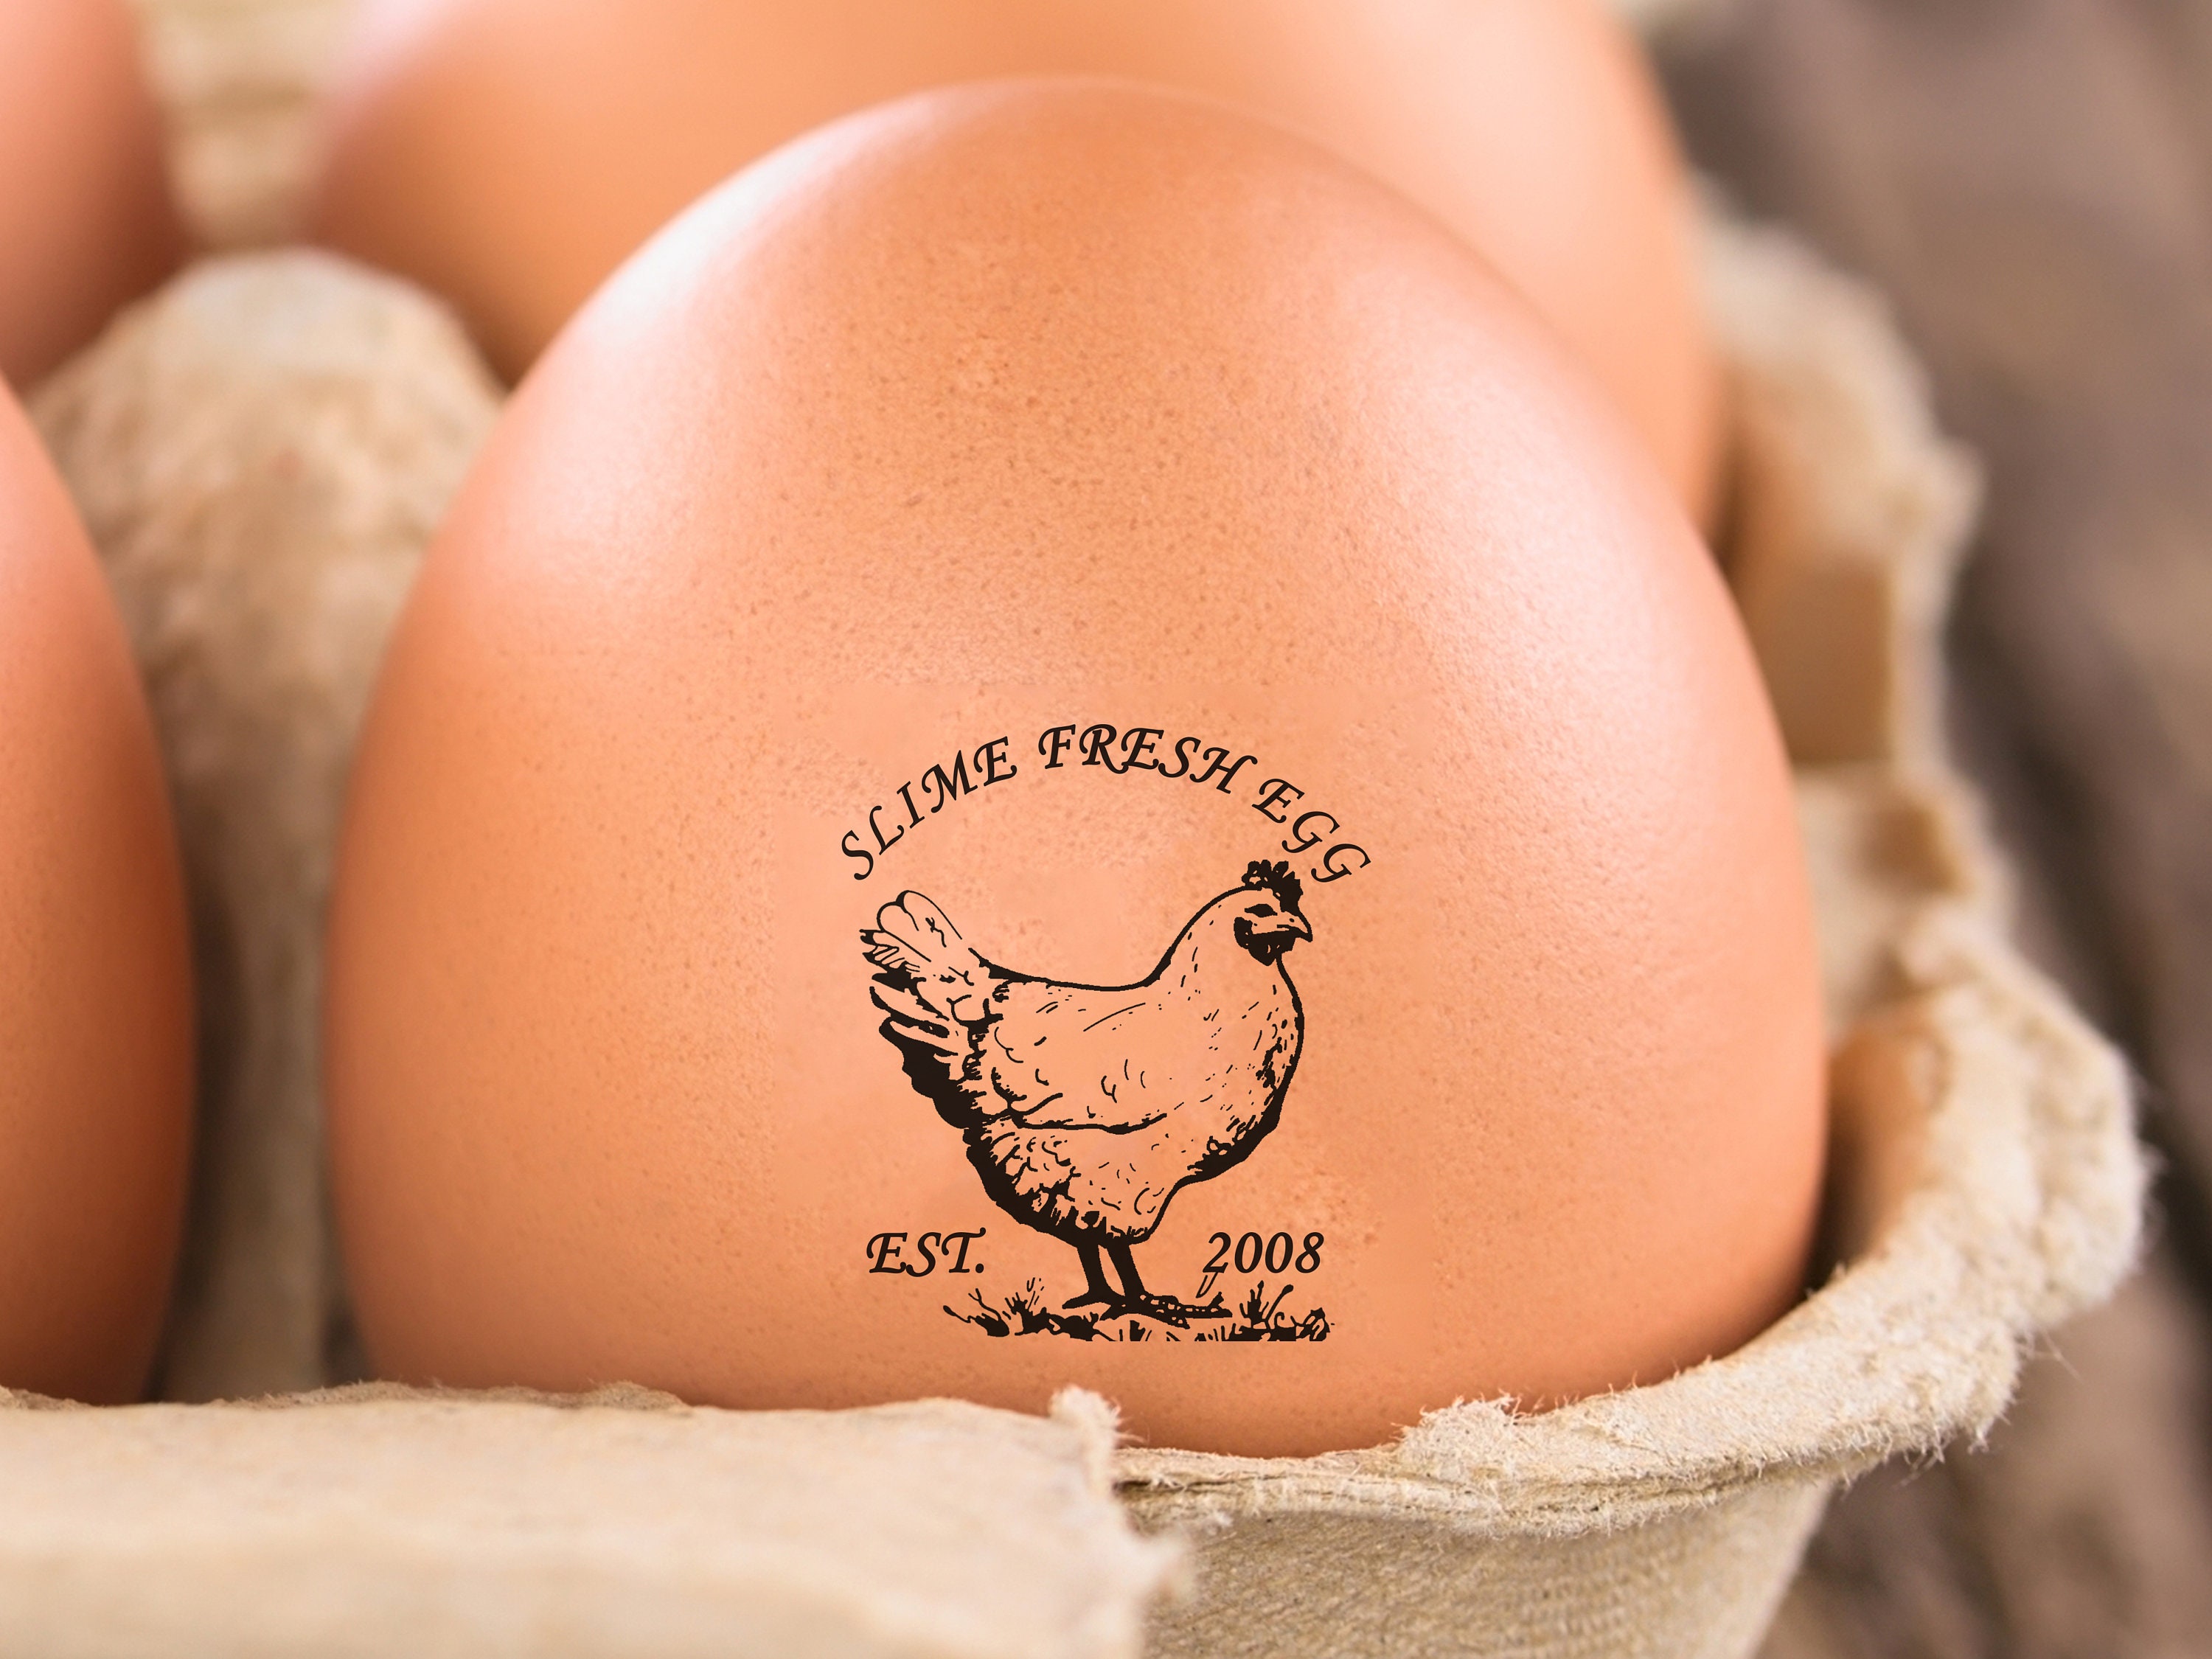  Egg Stamper for Chicken Eggs, Egg Stamps for Fresh Eggs, Farm  Fresh Egg Stamp, Egg Stamps for Fresh Eggs Personalized, Custom Chicken  Mini Egg Stamp Complete Rubber Stamp (Pattern 5) 